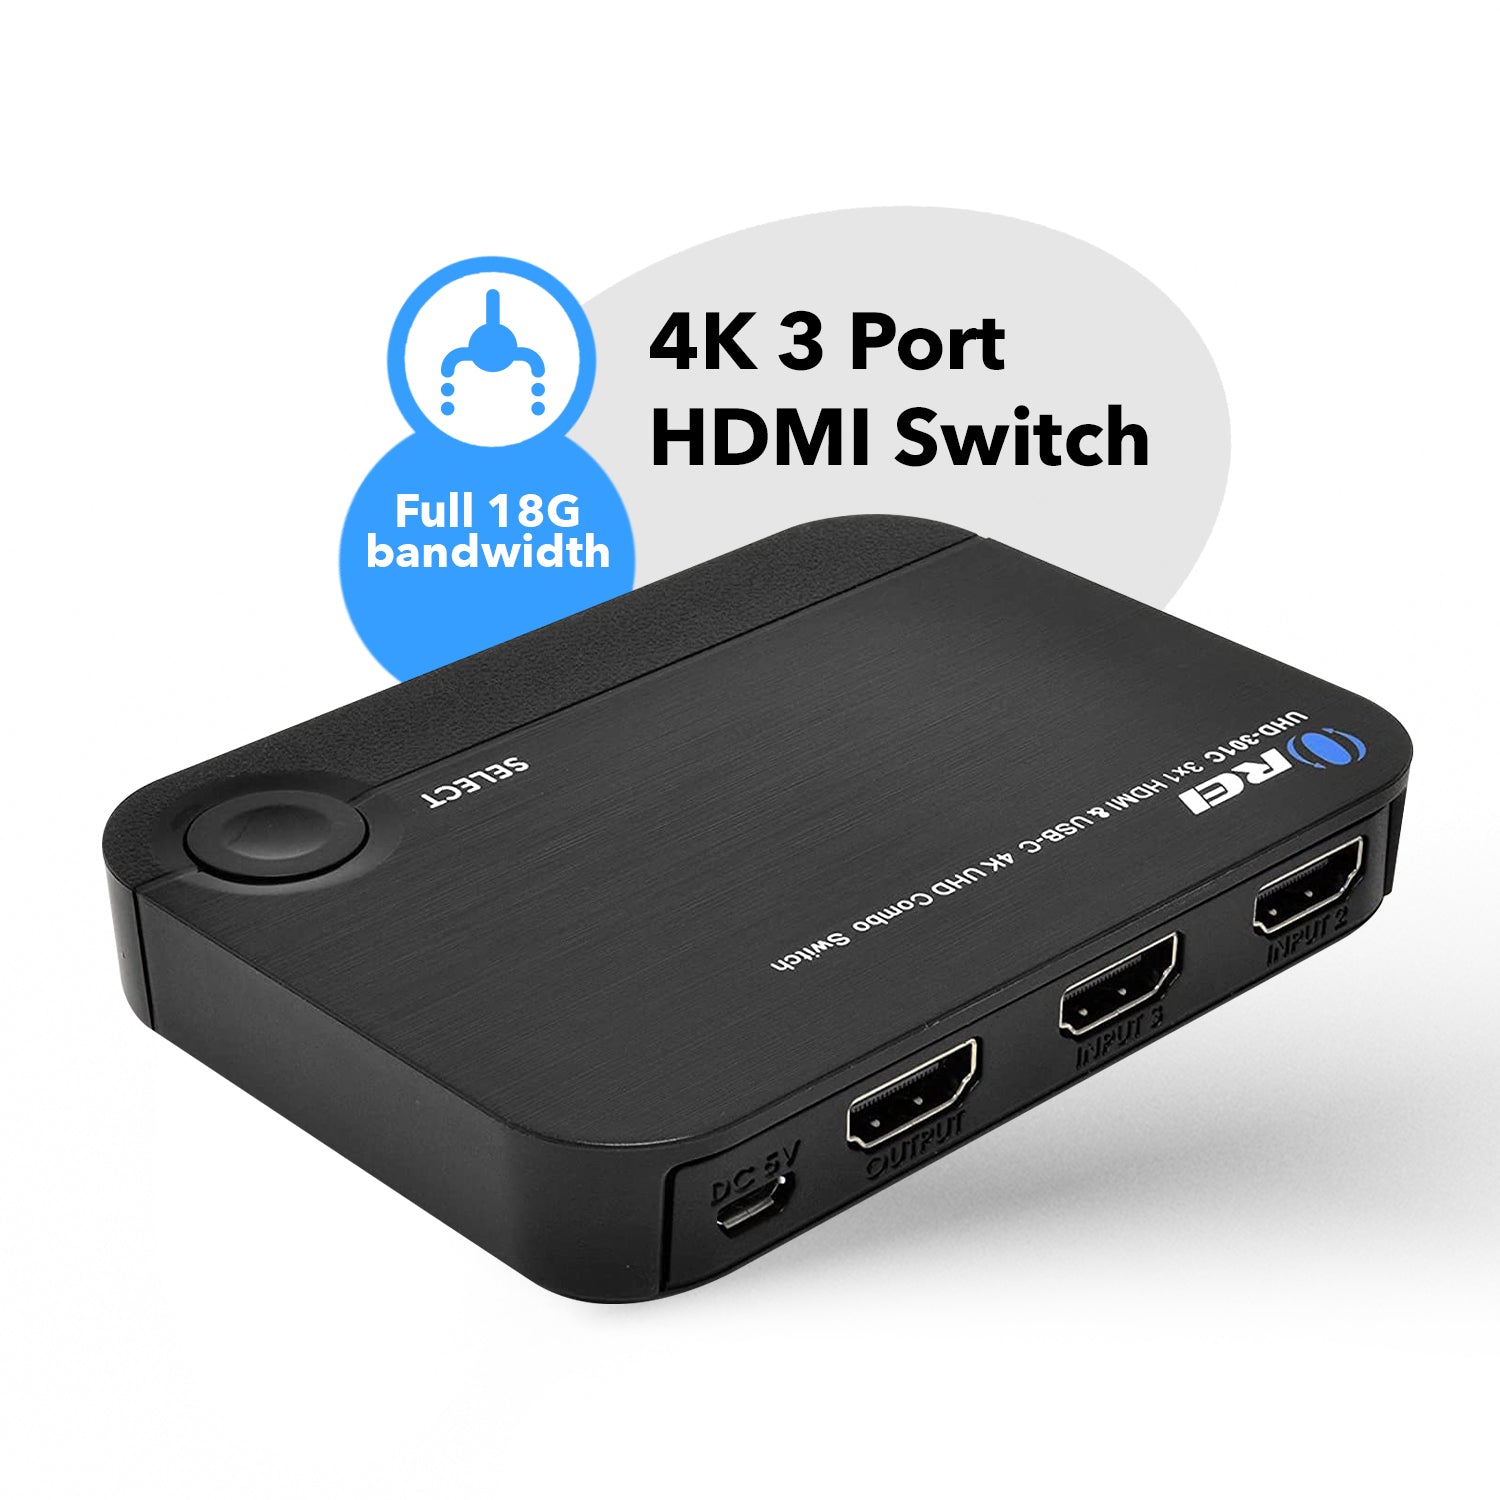 bang lidenskabelig Bloodstained 4K 3x1 HDMI Switch 2 HDMI + USB-C Input (UHD-301C) | OREI